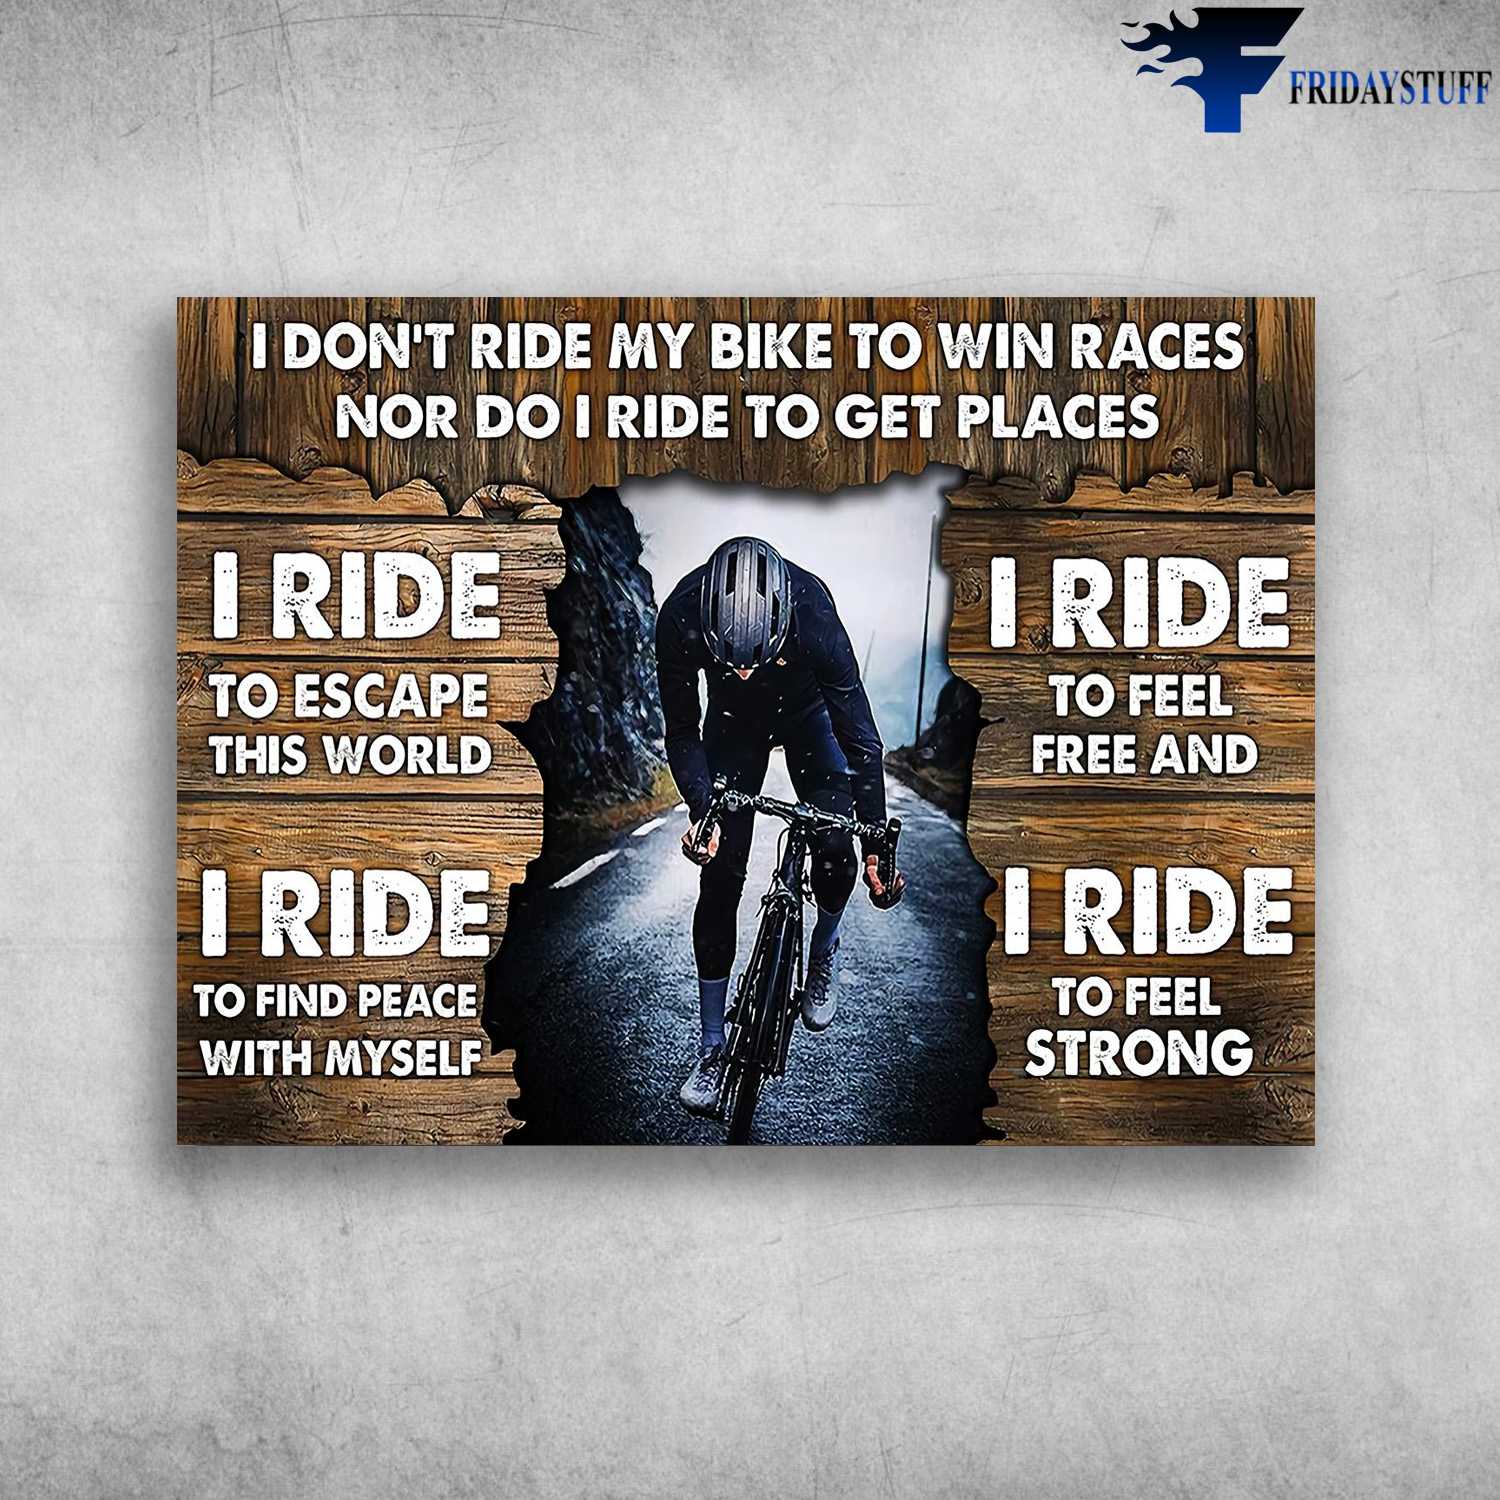 Cycling Man - I Don't Ride My Bike To Win Races, Nor Do I Ride To Get Places, I Ride To Escape This World, I Ride To Feel Free And, I Ride To Feel Strong